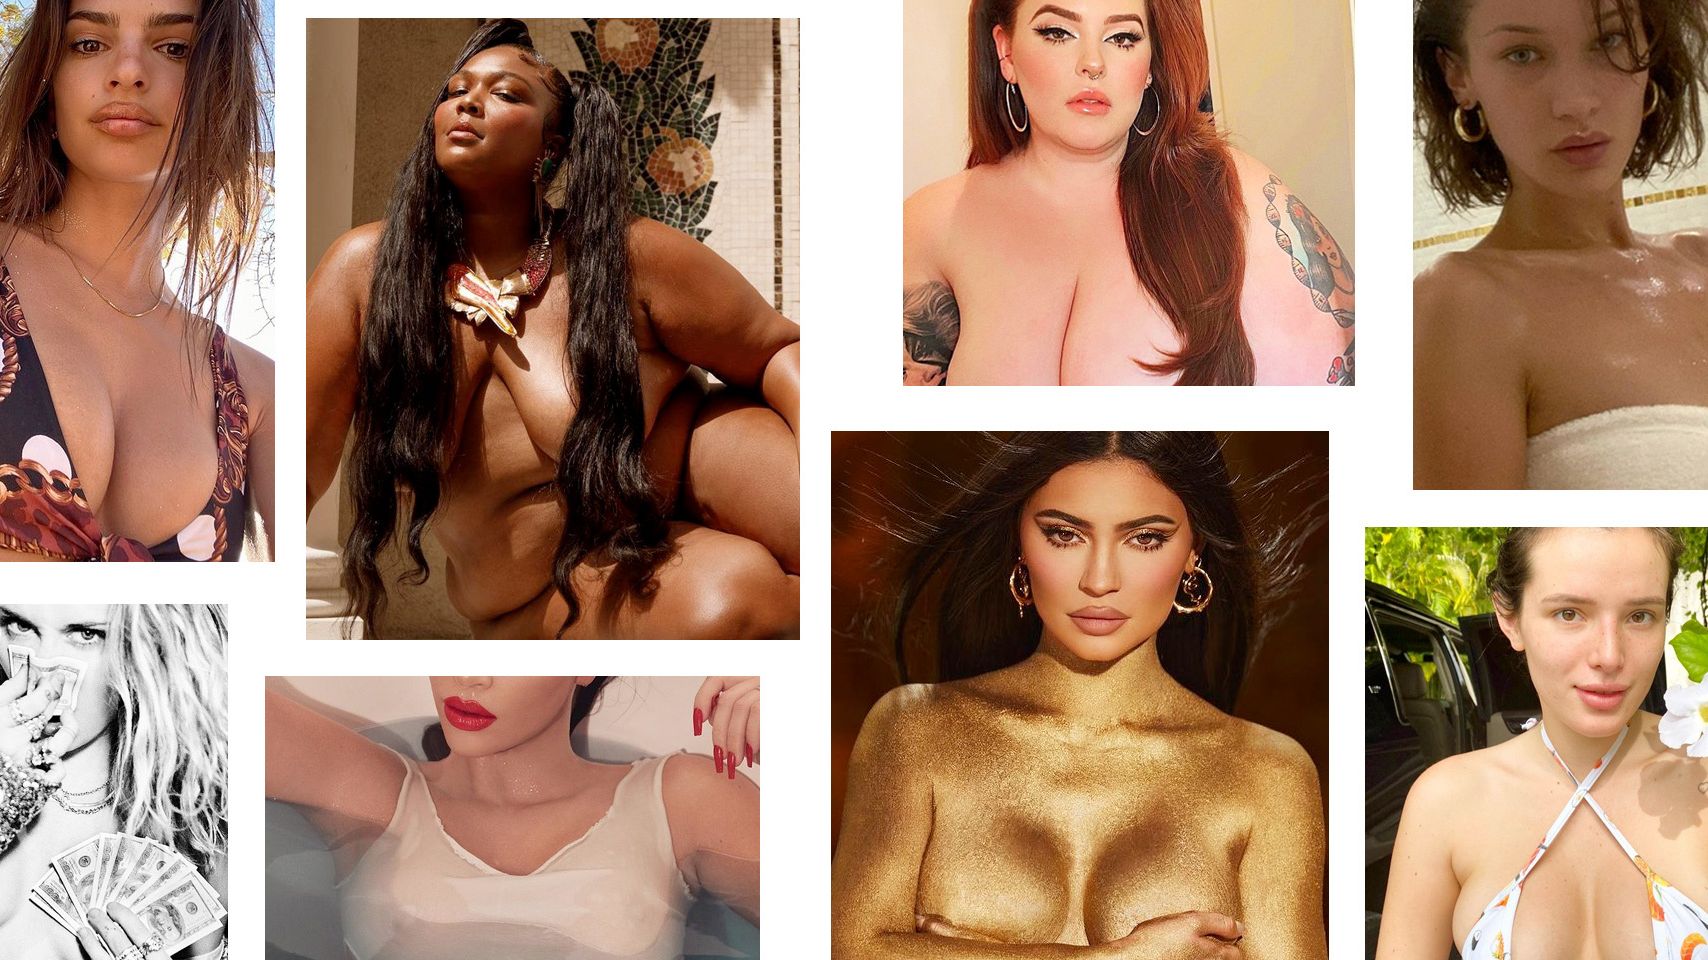 bella c recommends girls who show their boobs pic